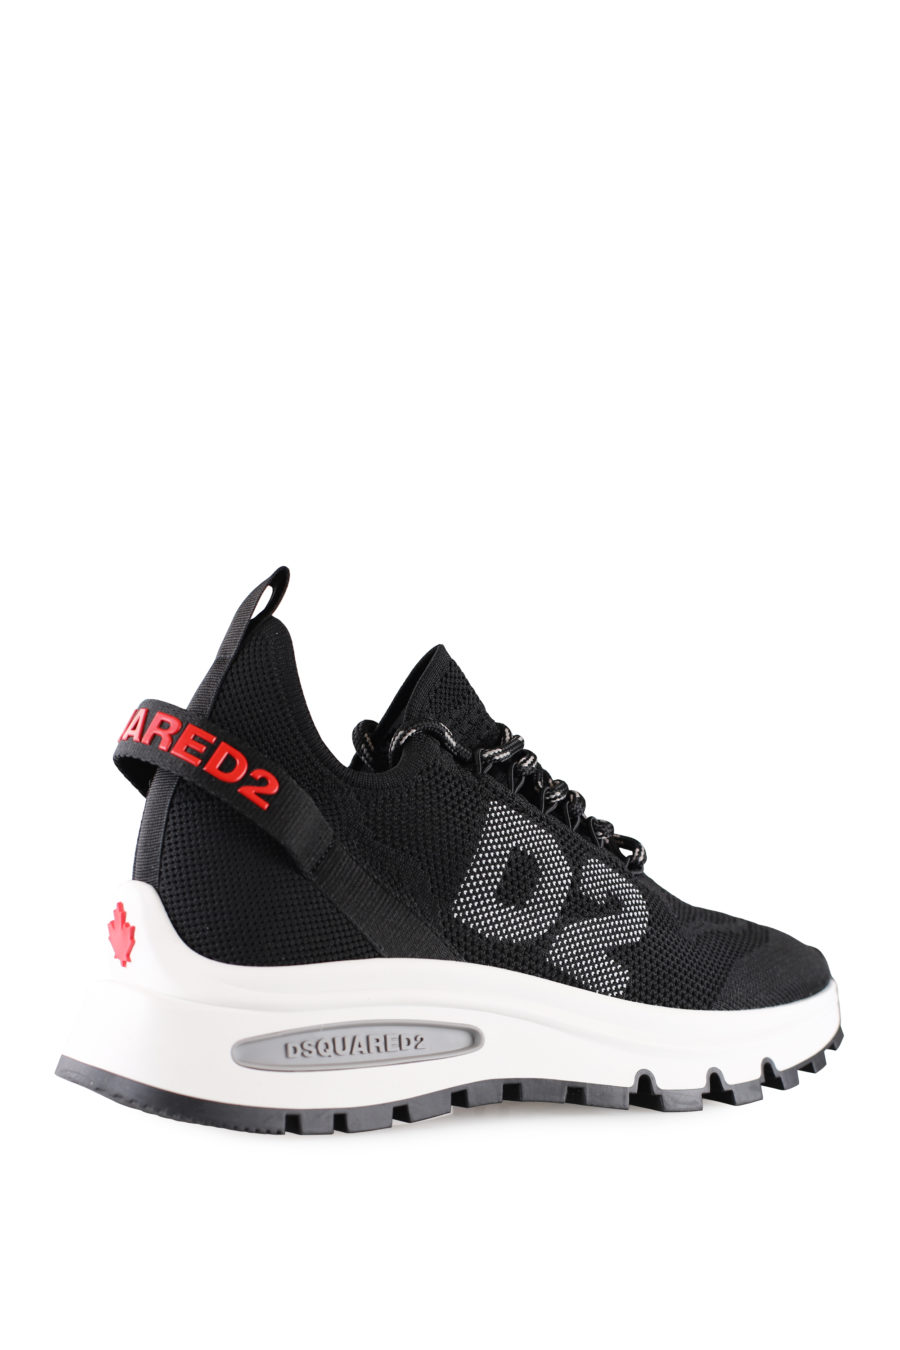 Black trainers with small red logo and "D2" - IMG 0006